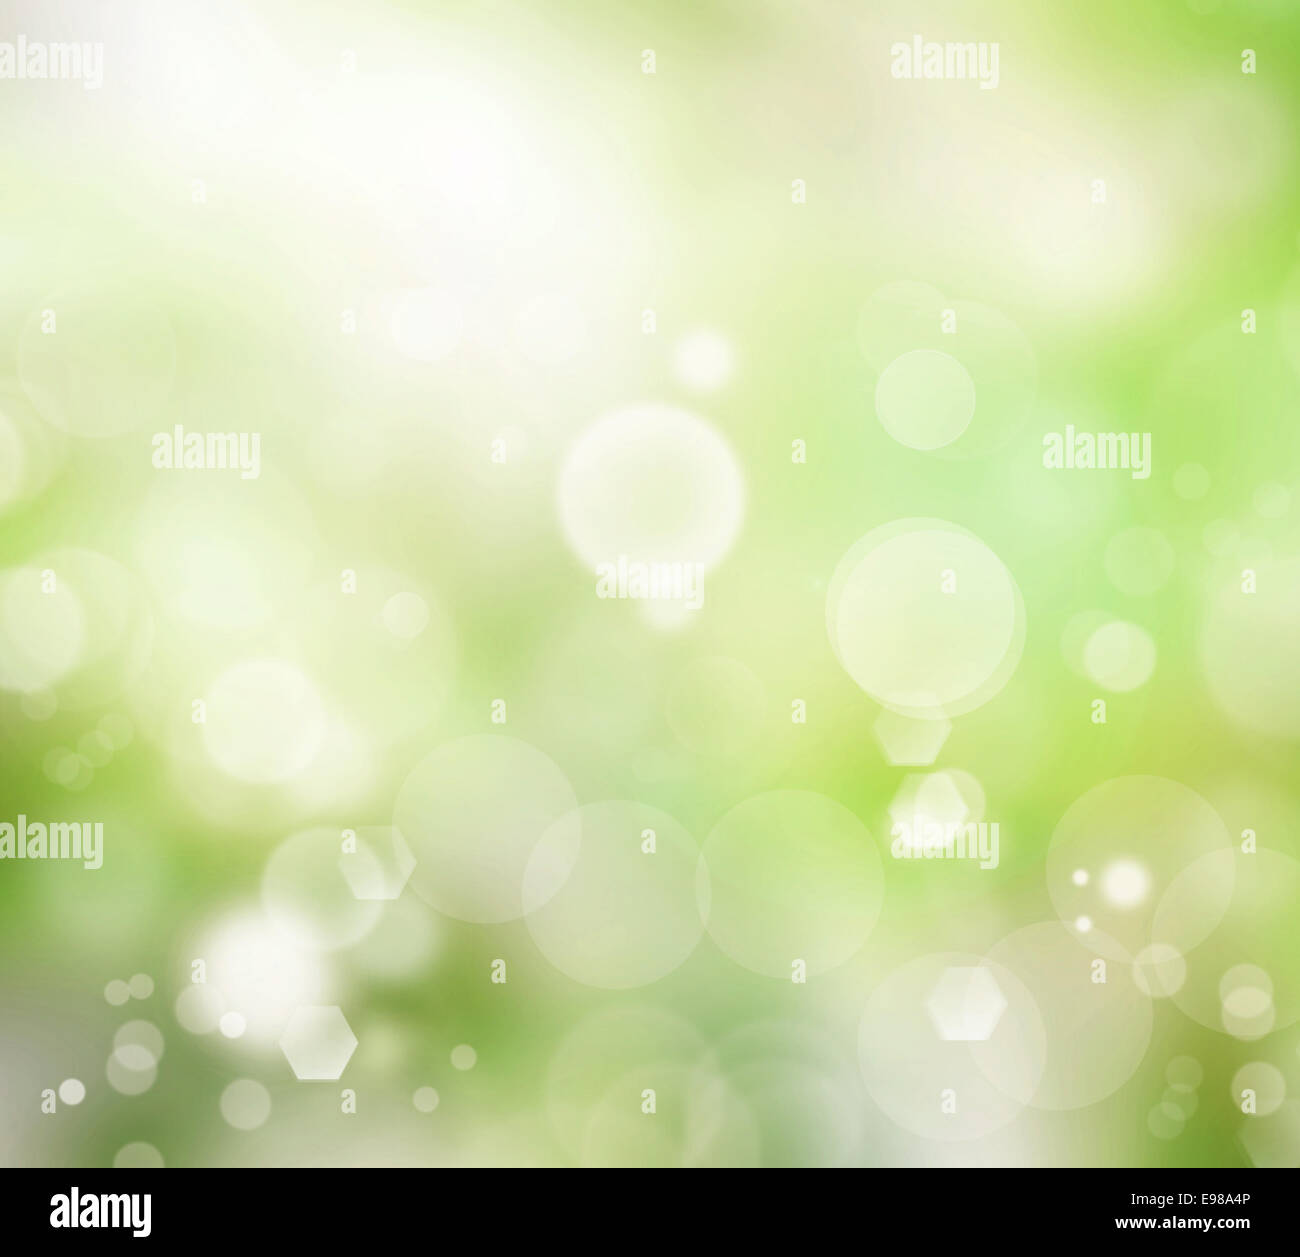 Relaxing blurred green glowy background with light bubbles Stock Photo -  Alamy